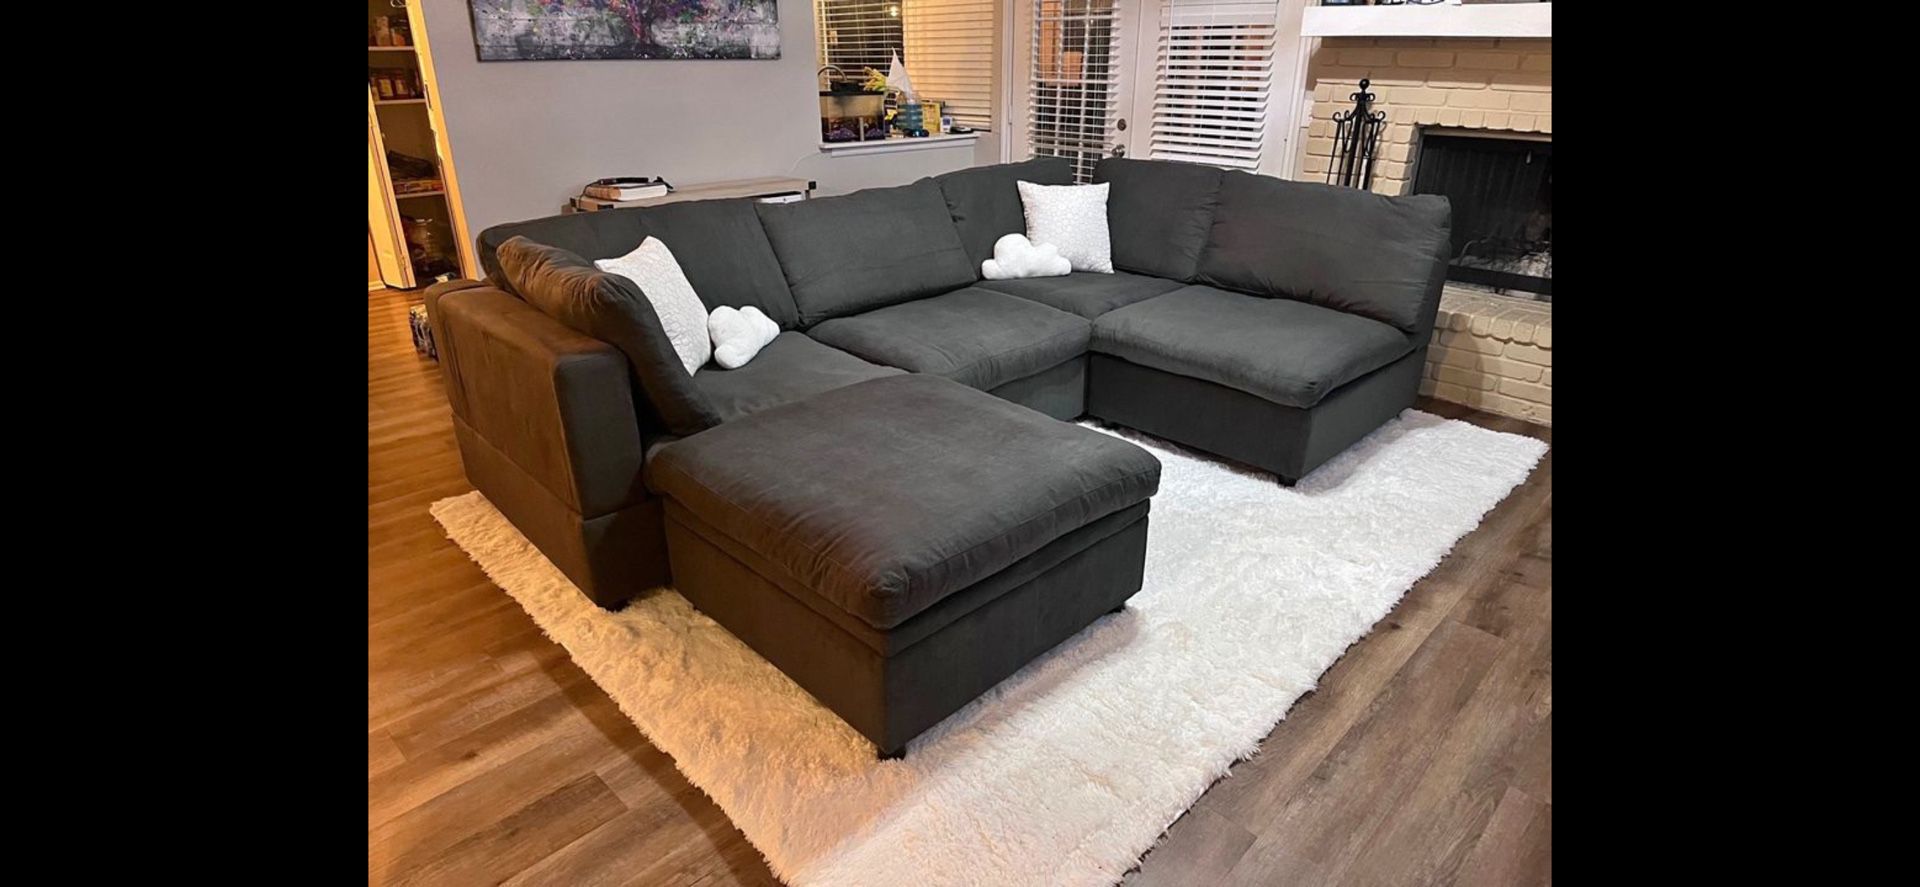 *BRAND NEW* Cloud Sectional (Free Delivery)